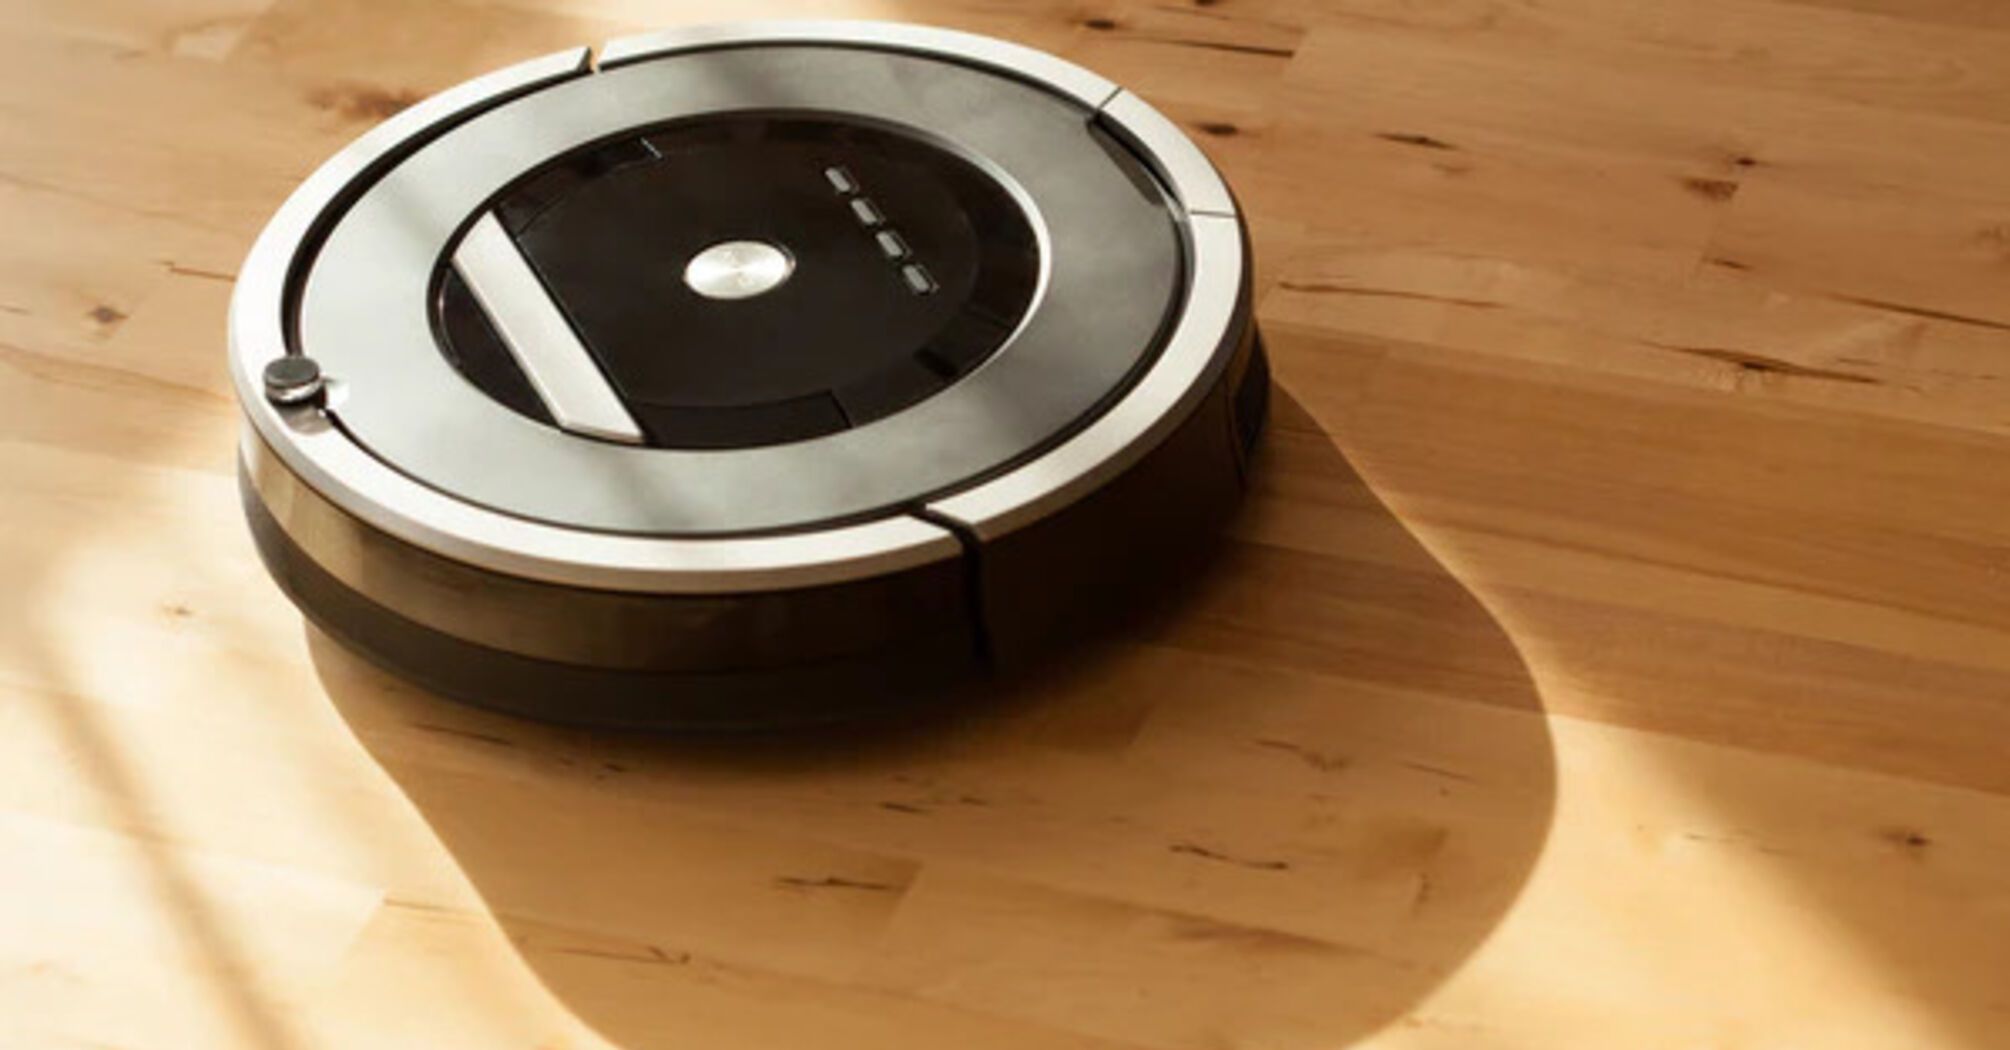 Should you buy a robot vacuum cleaner